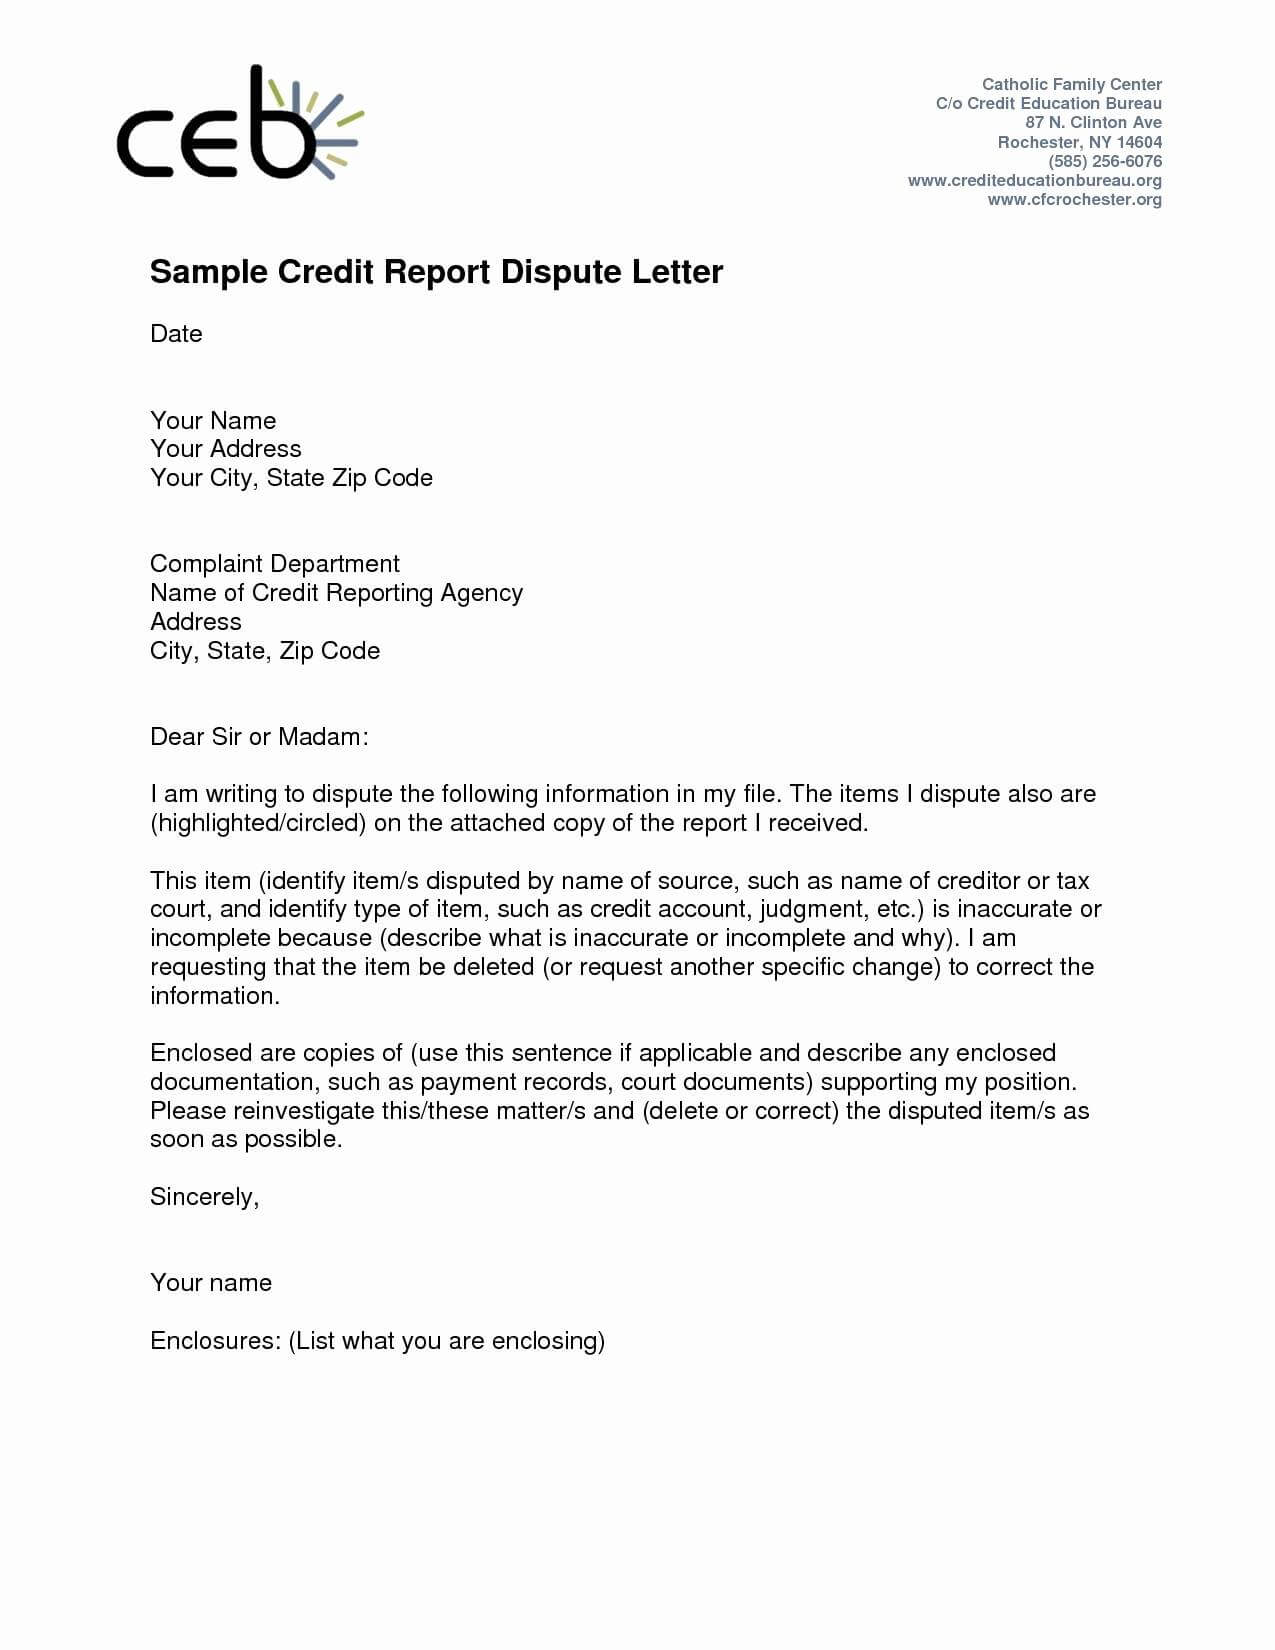 Template For Credit Report Dispute Letter Samples | Letter In Credit Report Dispute Letter Template